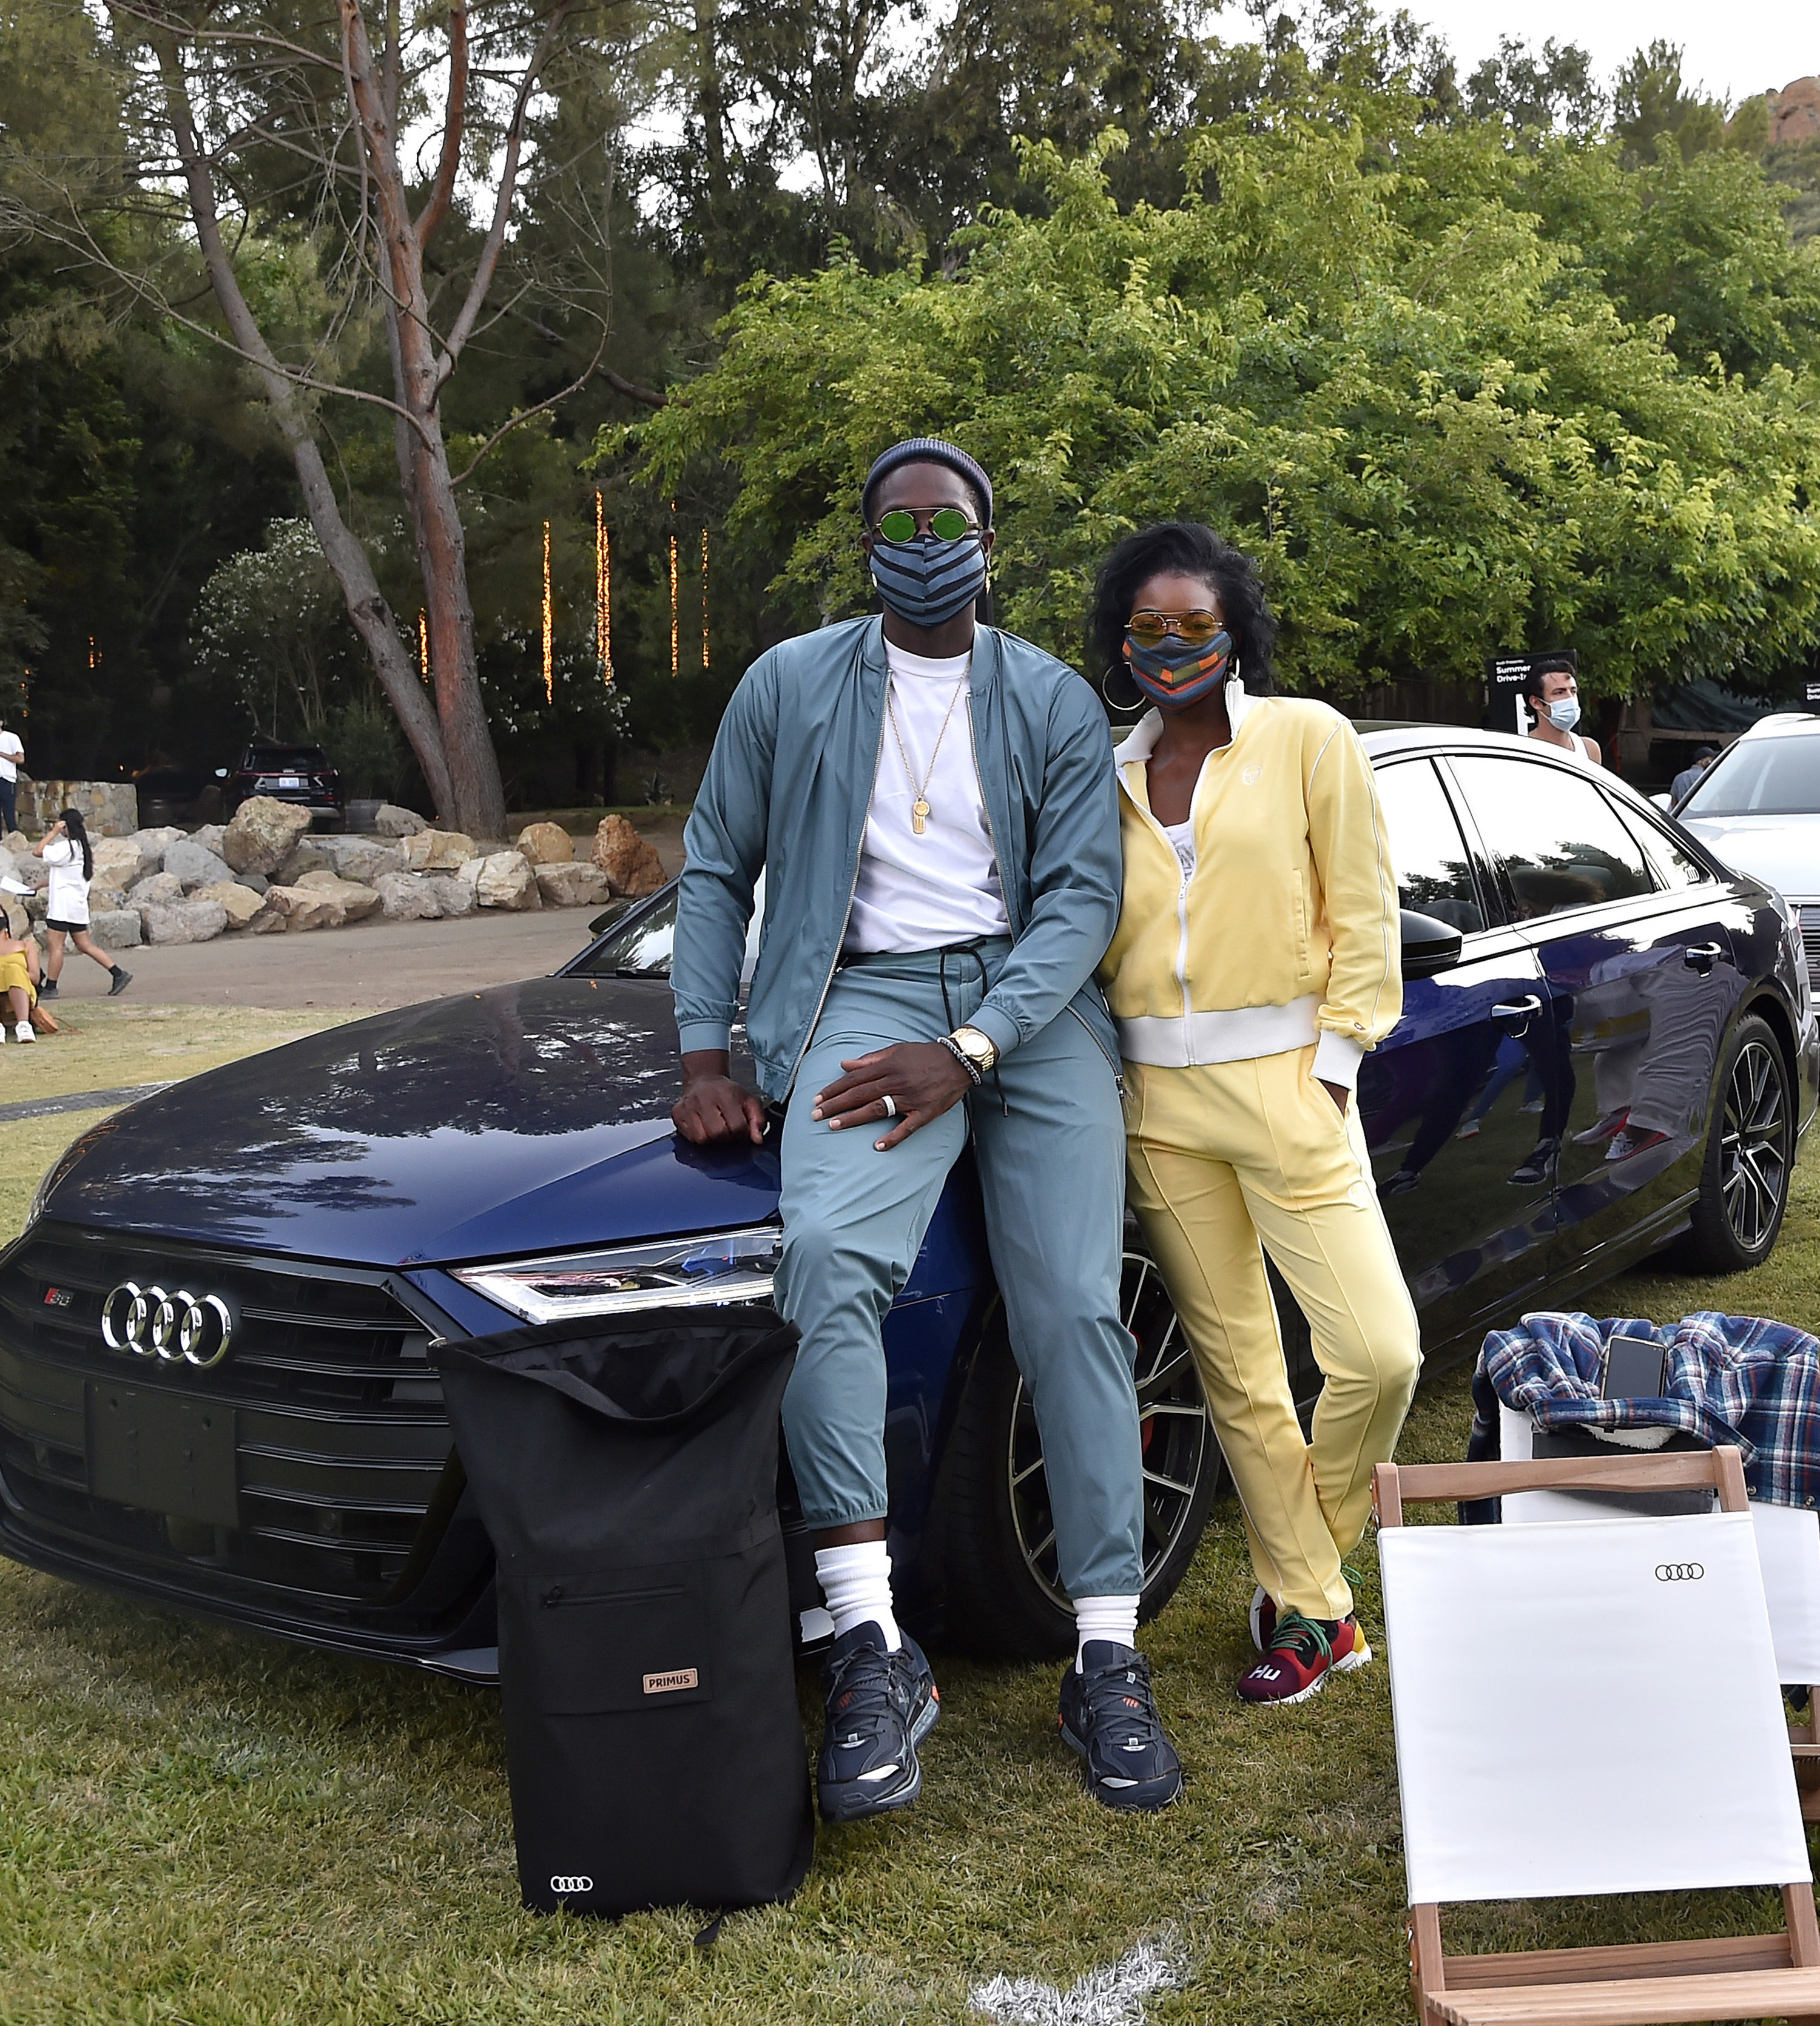 Gabrielle and her husband Dwyane leaning against a car and wearing face masks as they pose for a photo